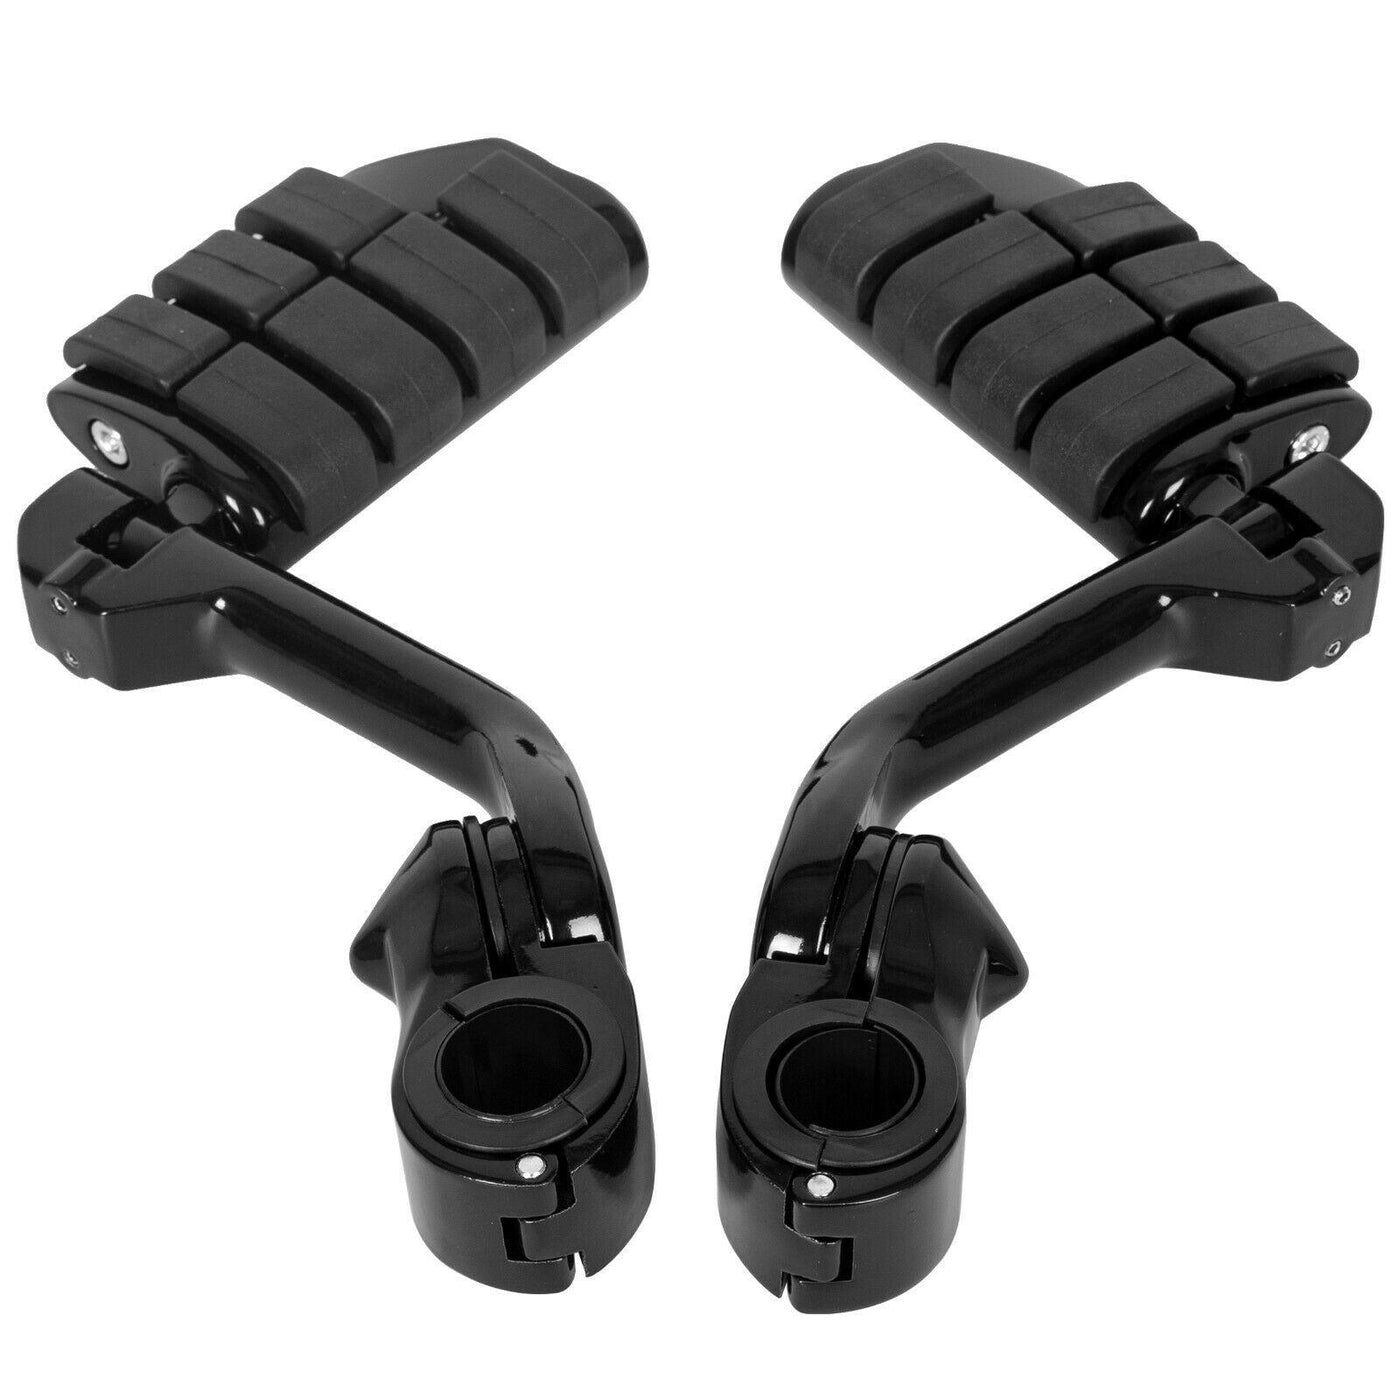 Highway Engine Guards Long Angled Mount Foot Pegs For Harley Davidson 1-1/4" - Moto Life Products